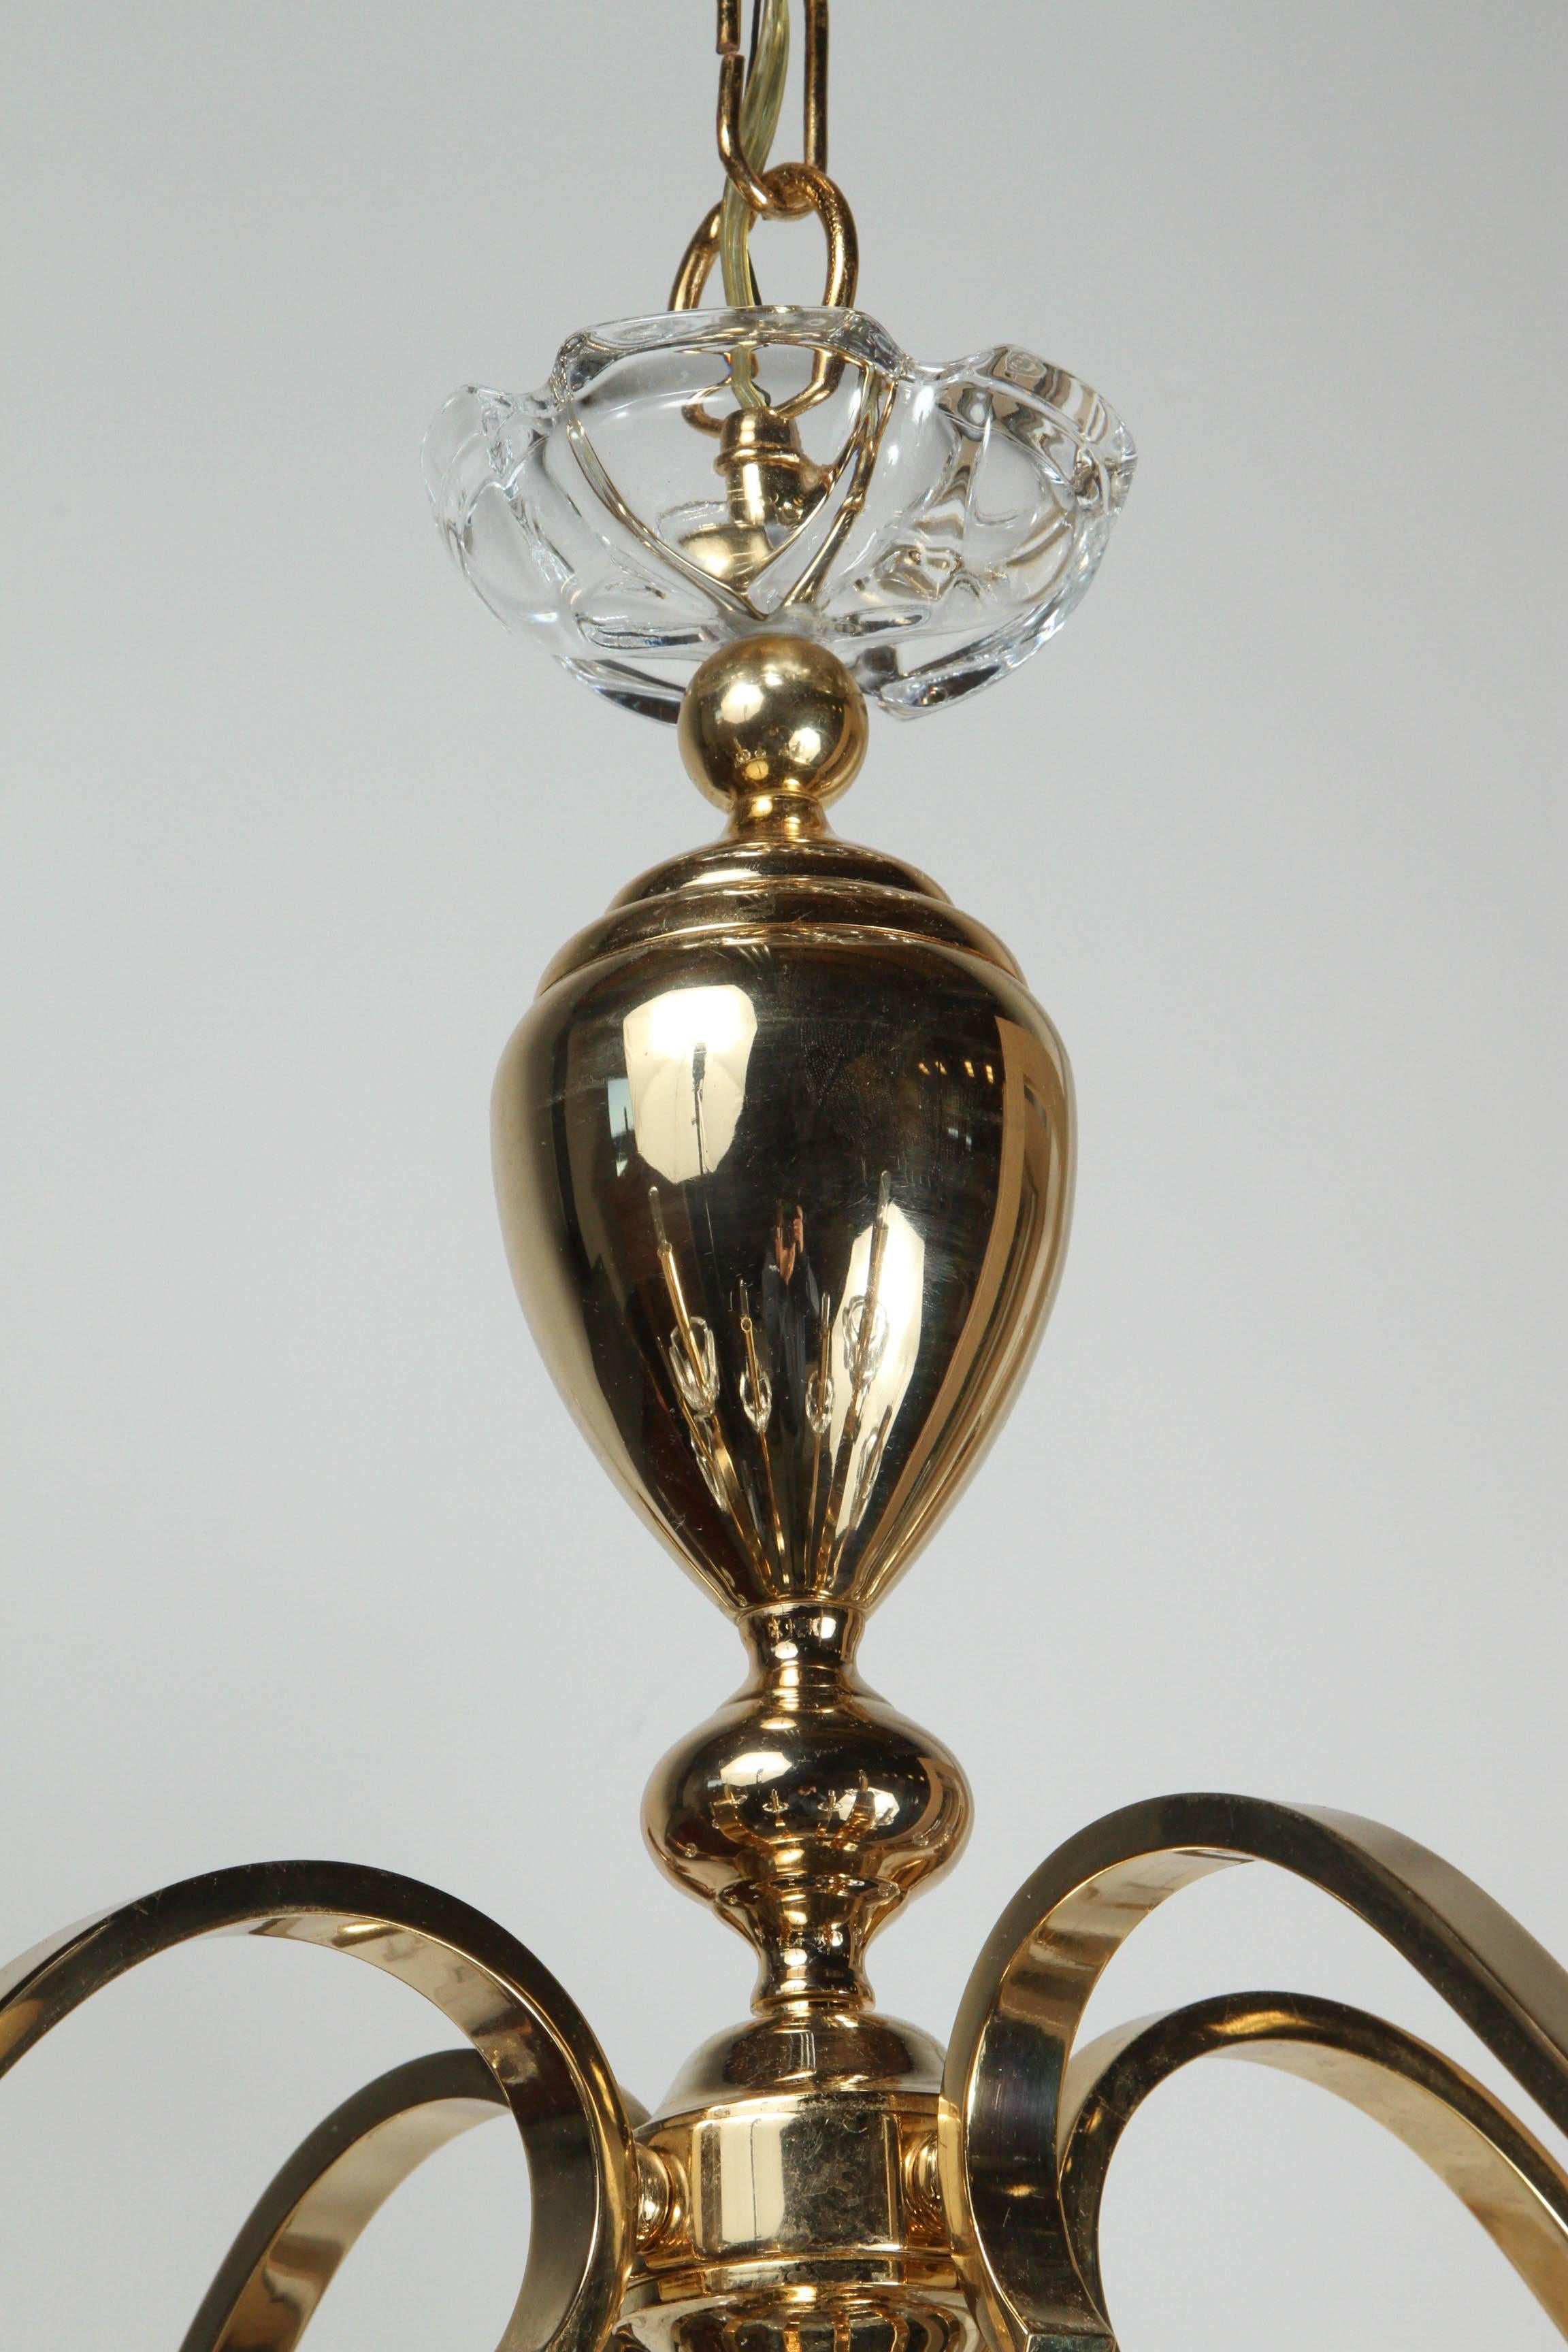 Elegant Twelve-Arm Polished Brass Chandelier In Excellent Condition For Sale In New York, NY